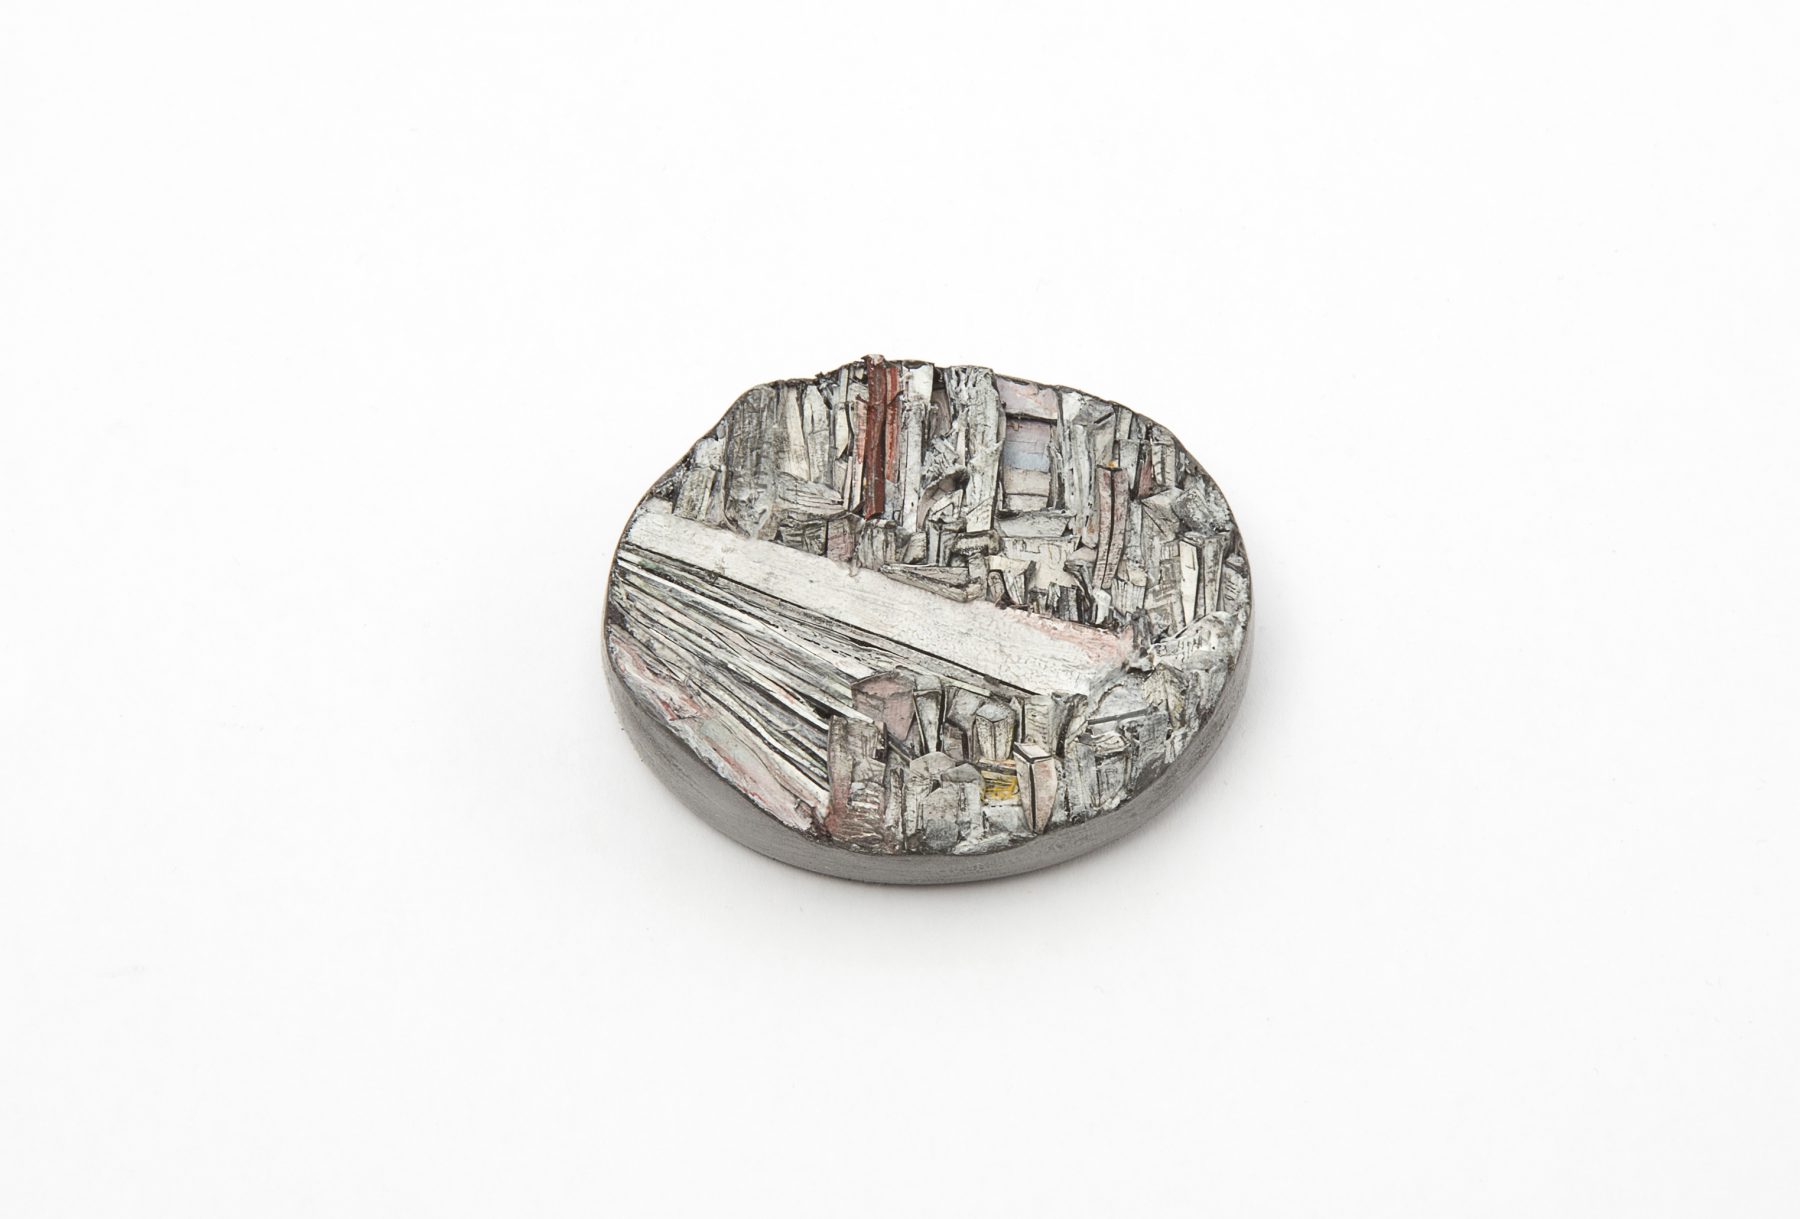 Untitled | Brooch | 2017 | Paper, paint, silver, wood, graphite, stainless steel | 54X42X25mm